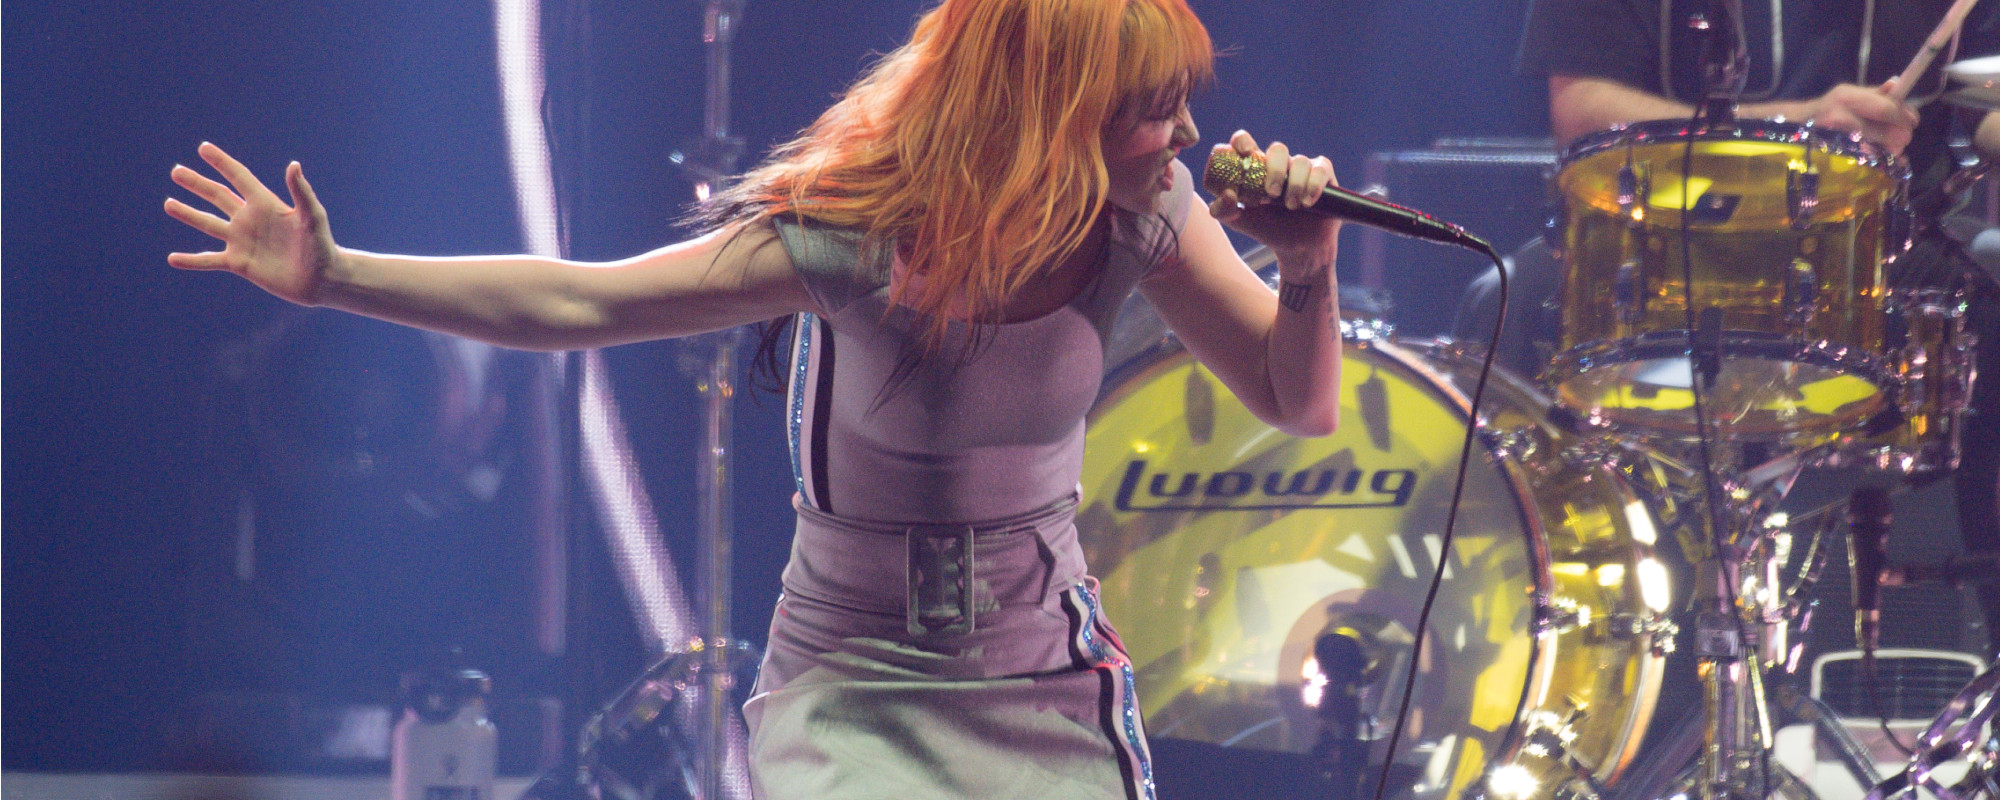 Paramore Fans Go Into a Frenzy After Band Deletes Social Medias Amid “Uncertainty” Claims